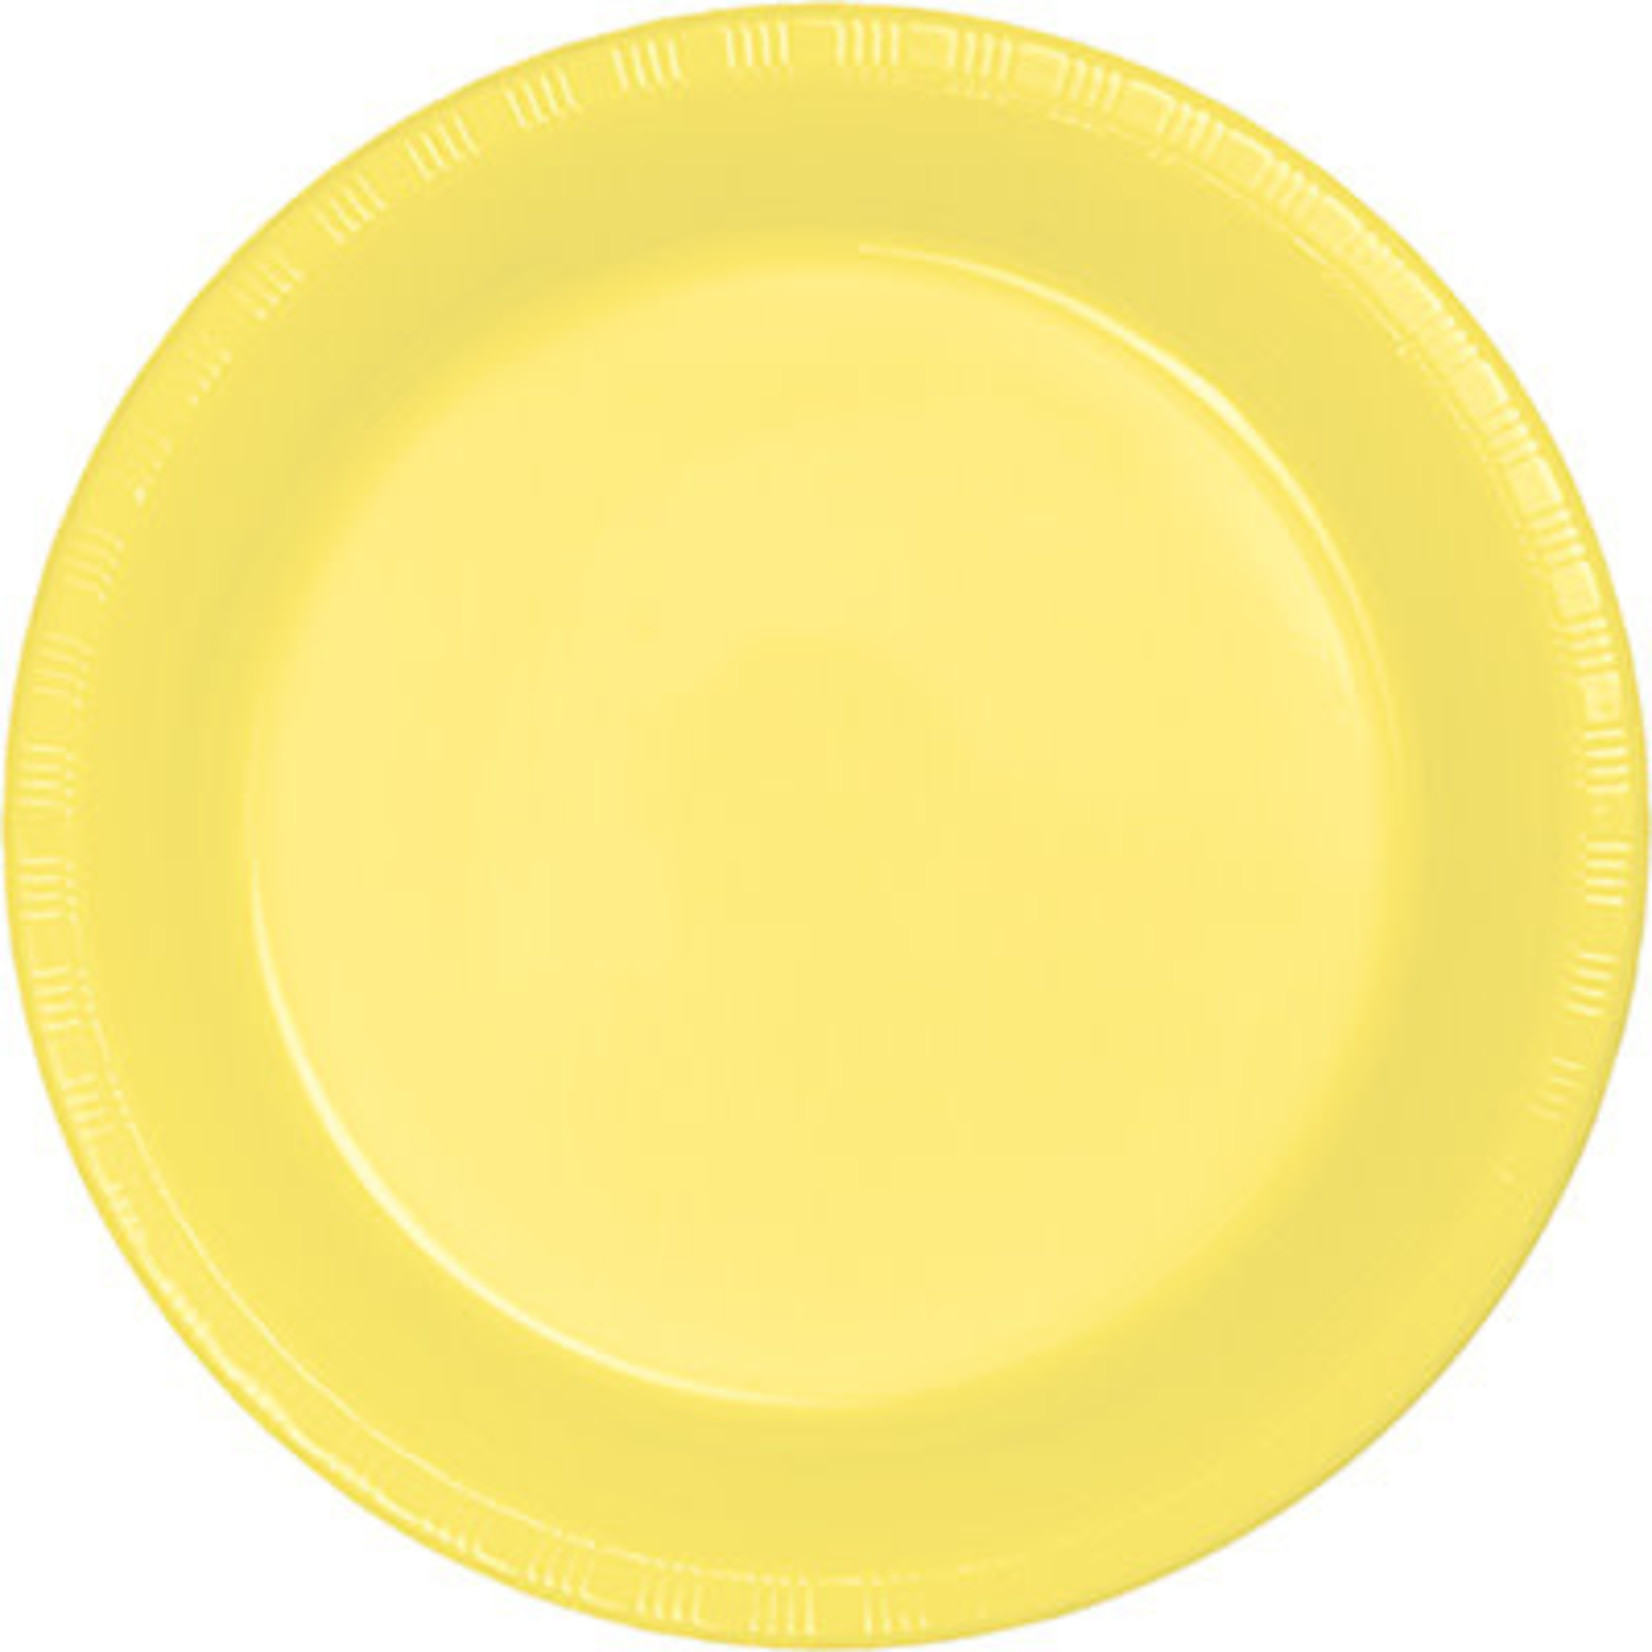 Touch of Color 7" Mimosa Yellow Plastic Plates - 20ct.